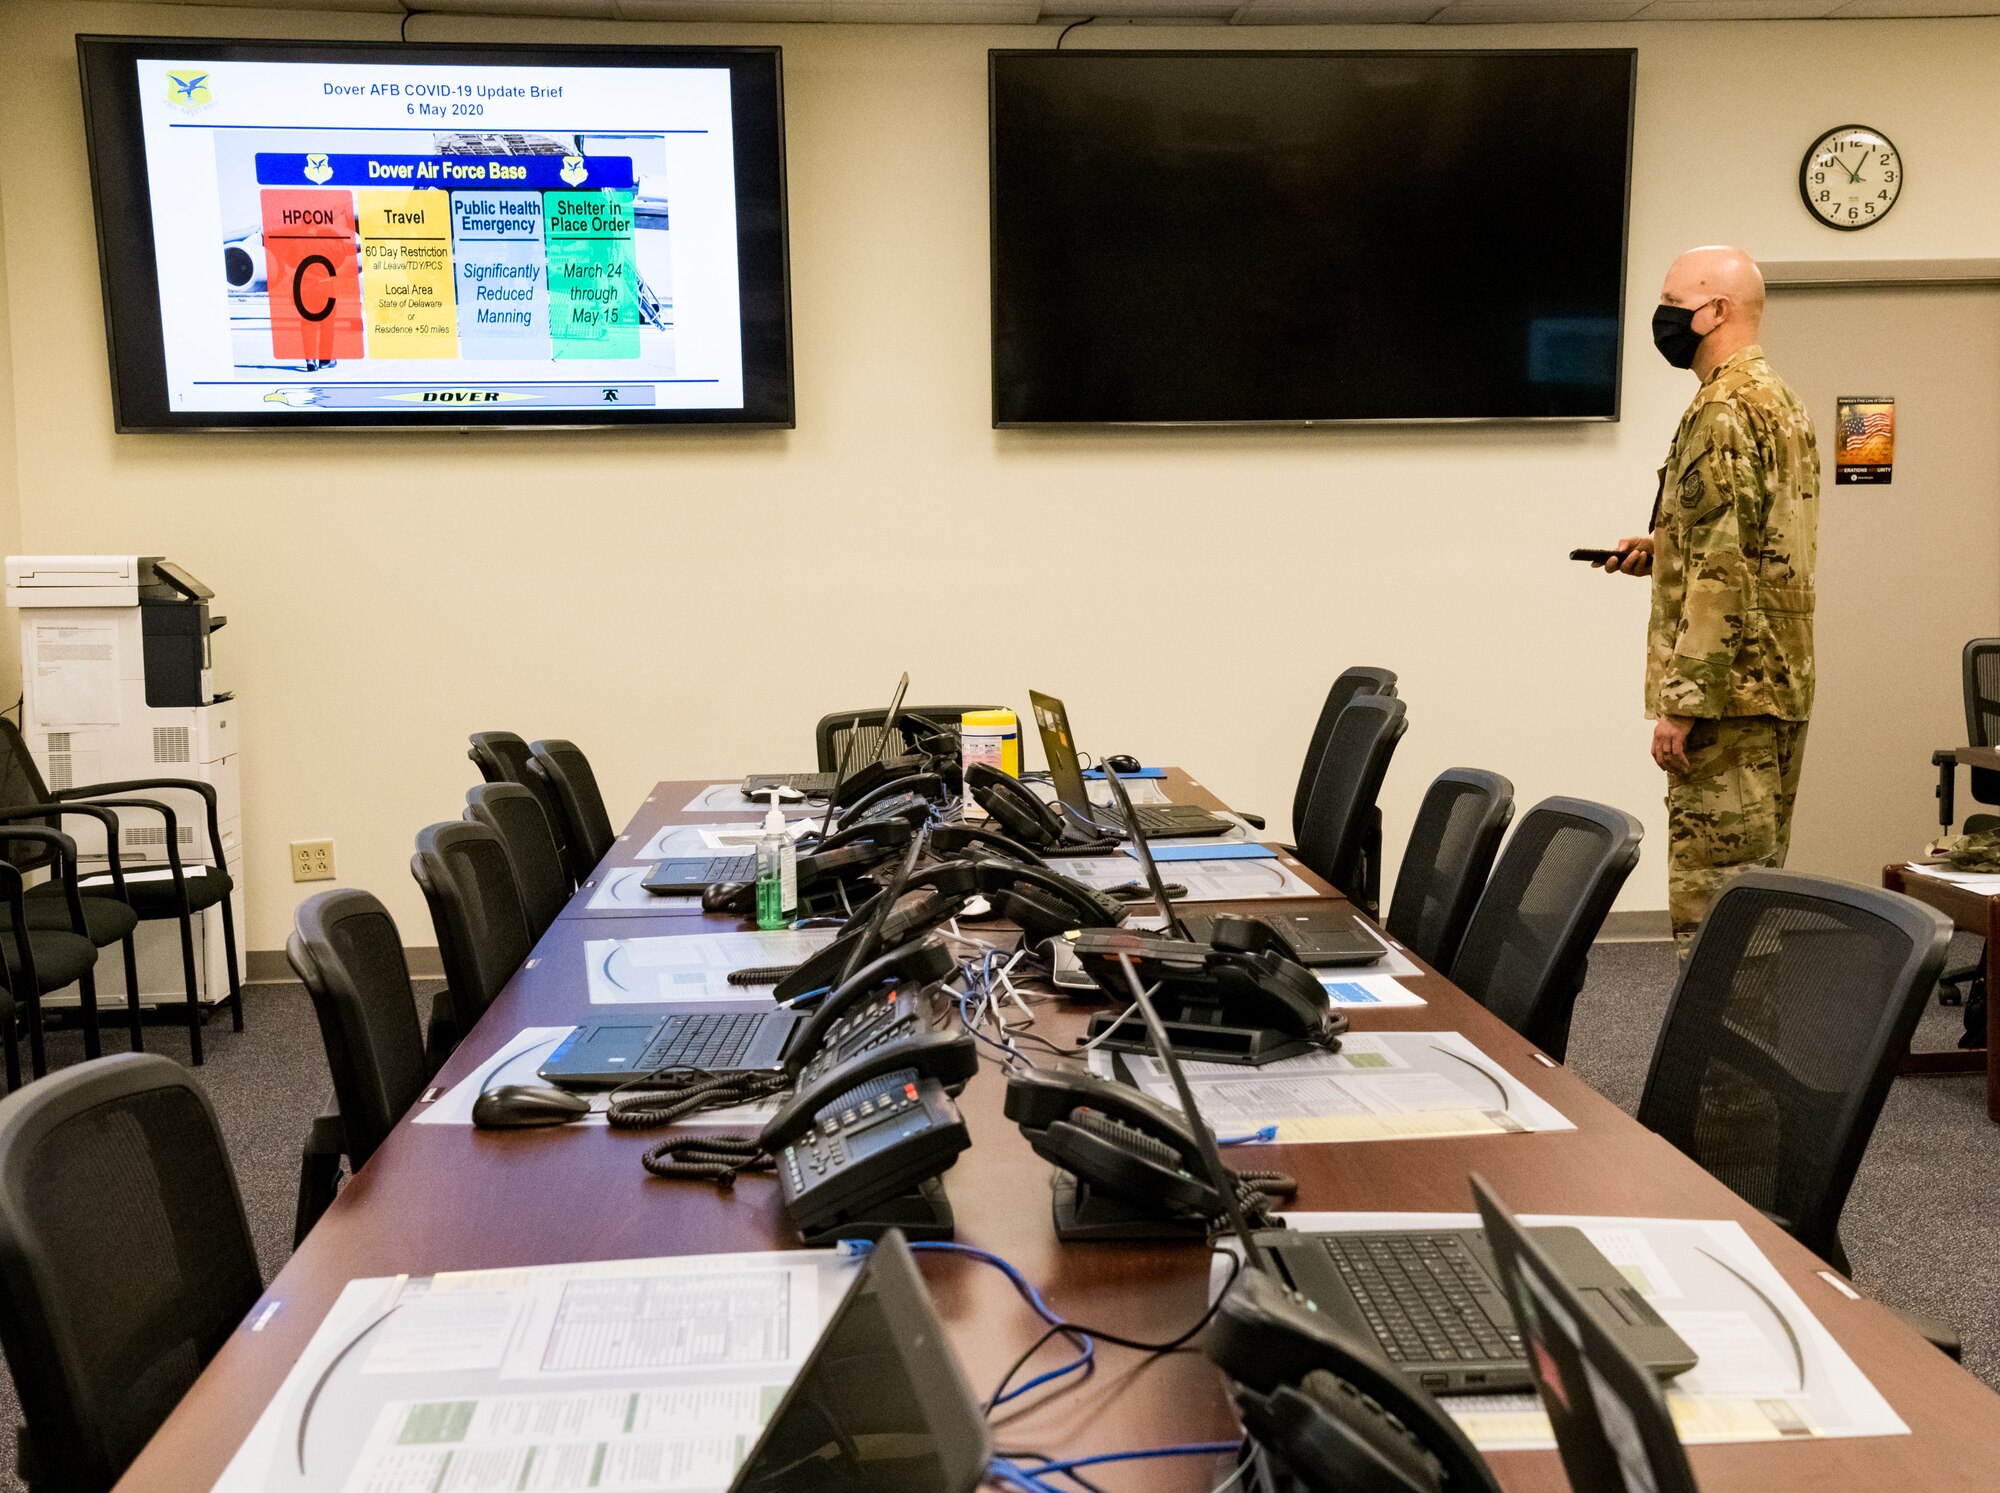 Battle Staff facilitator Master Sgt. Jeremy Gerberick, 436th Airlift Wing plans and programs superintendent, sets up slides in the alternate Installation Control Center a for weekly teleconference between the wing commander, command chief and group commanders and superintendents May 6, 2020, on Dover Air Force Base, Delaware. The Battle Staff resorted to virtual meetings after Shelter-In-Place orders were put into place in mid-March to help mitigate the spread of COVID-19. Following the first briefing, a second briefing is held to disseminate current information to squadron commanders. (U.S. Air Force photo by Roland Balik)